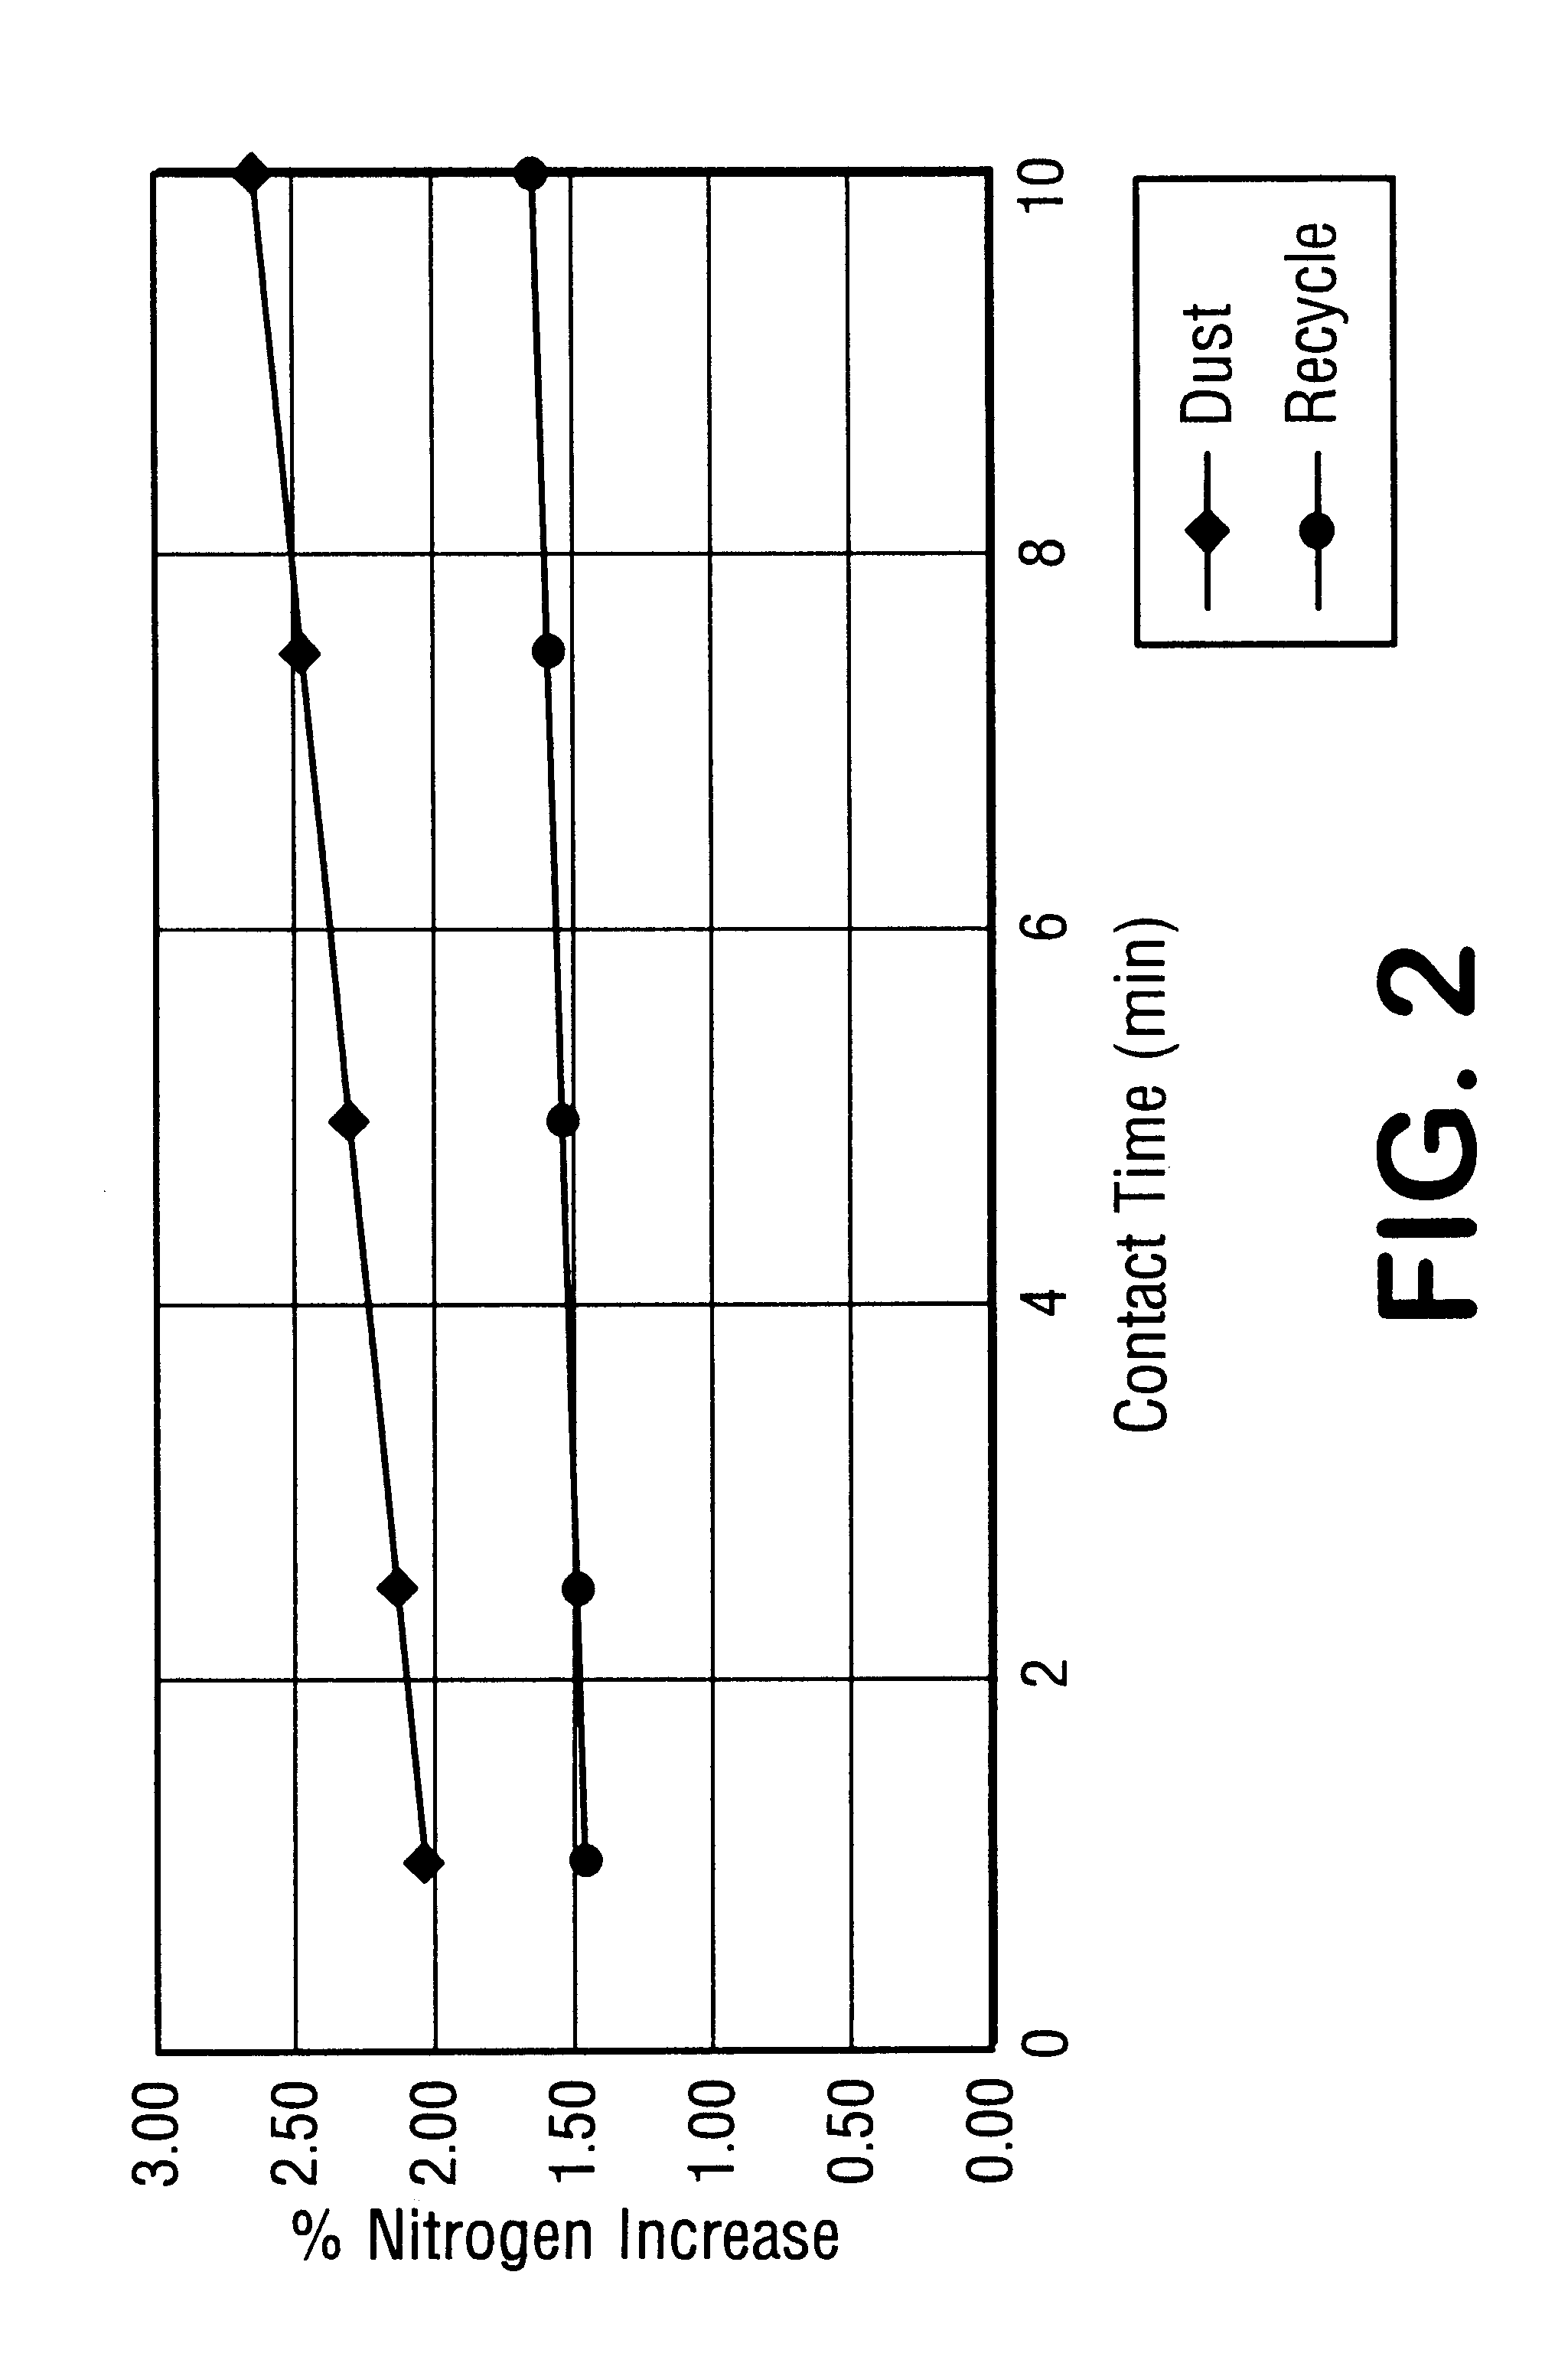 Method for producing fertilizer grade DAP having an increased nitrogen concentration from recycle